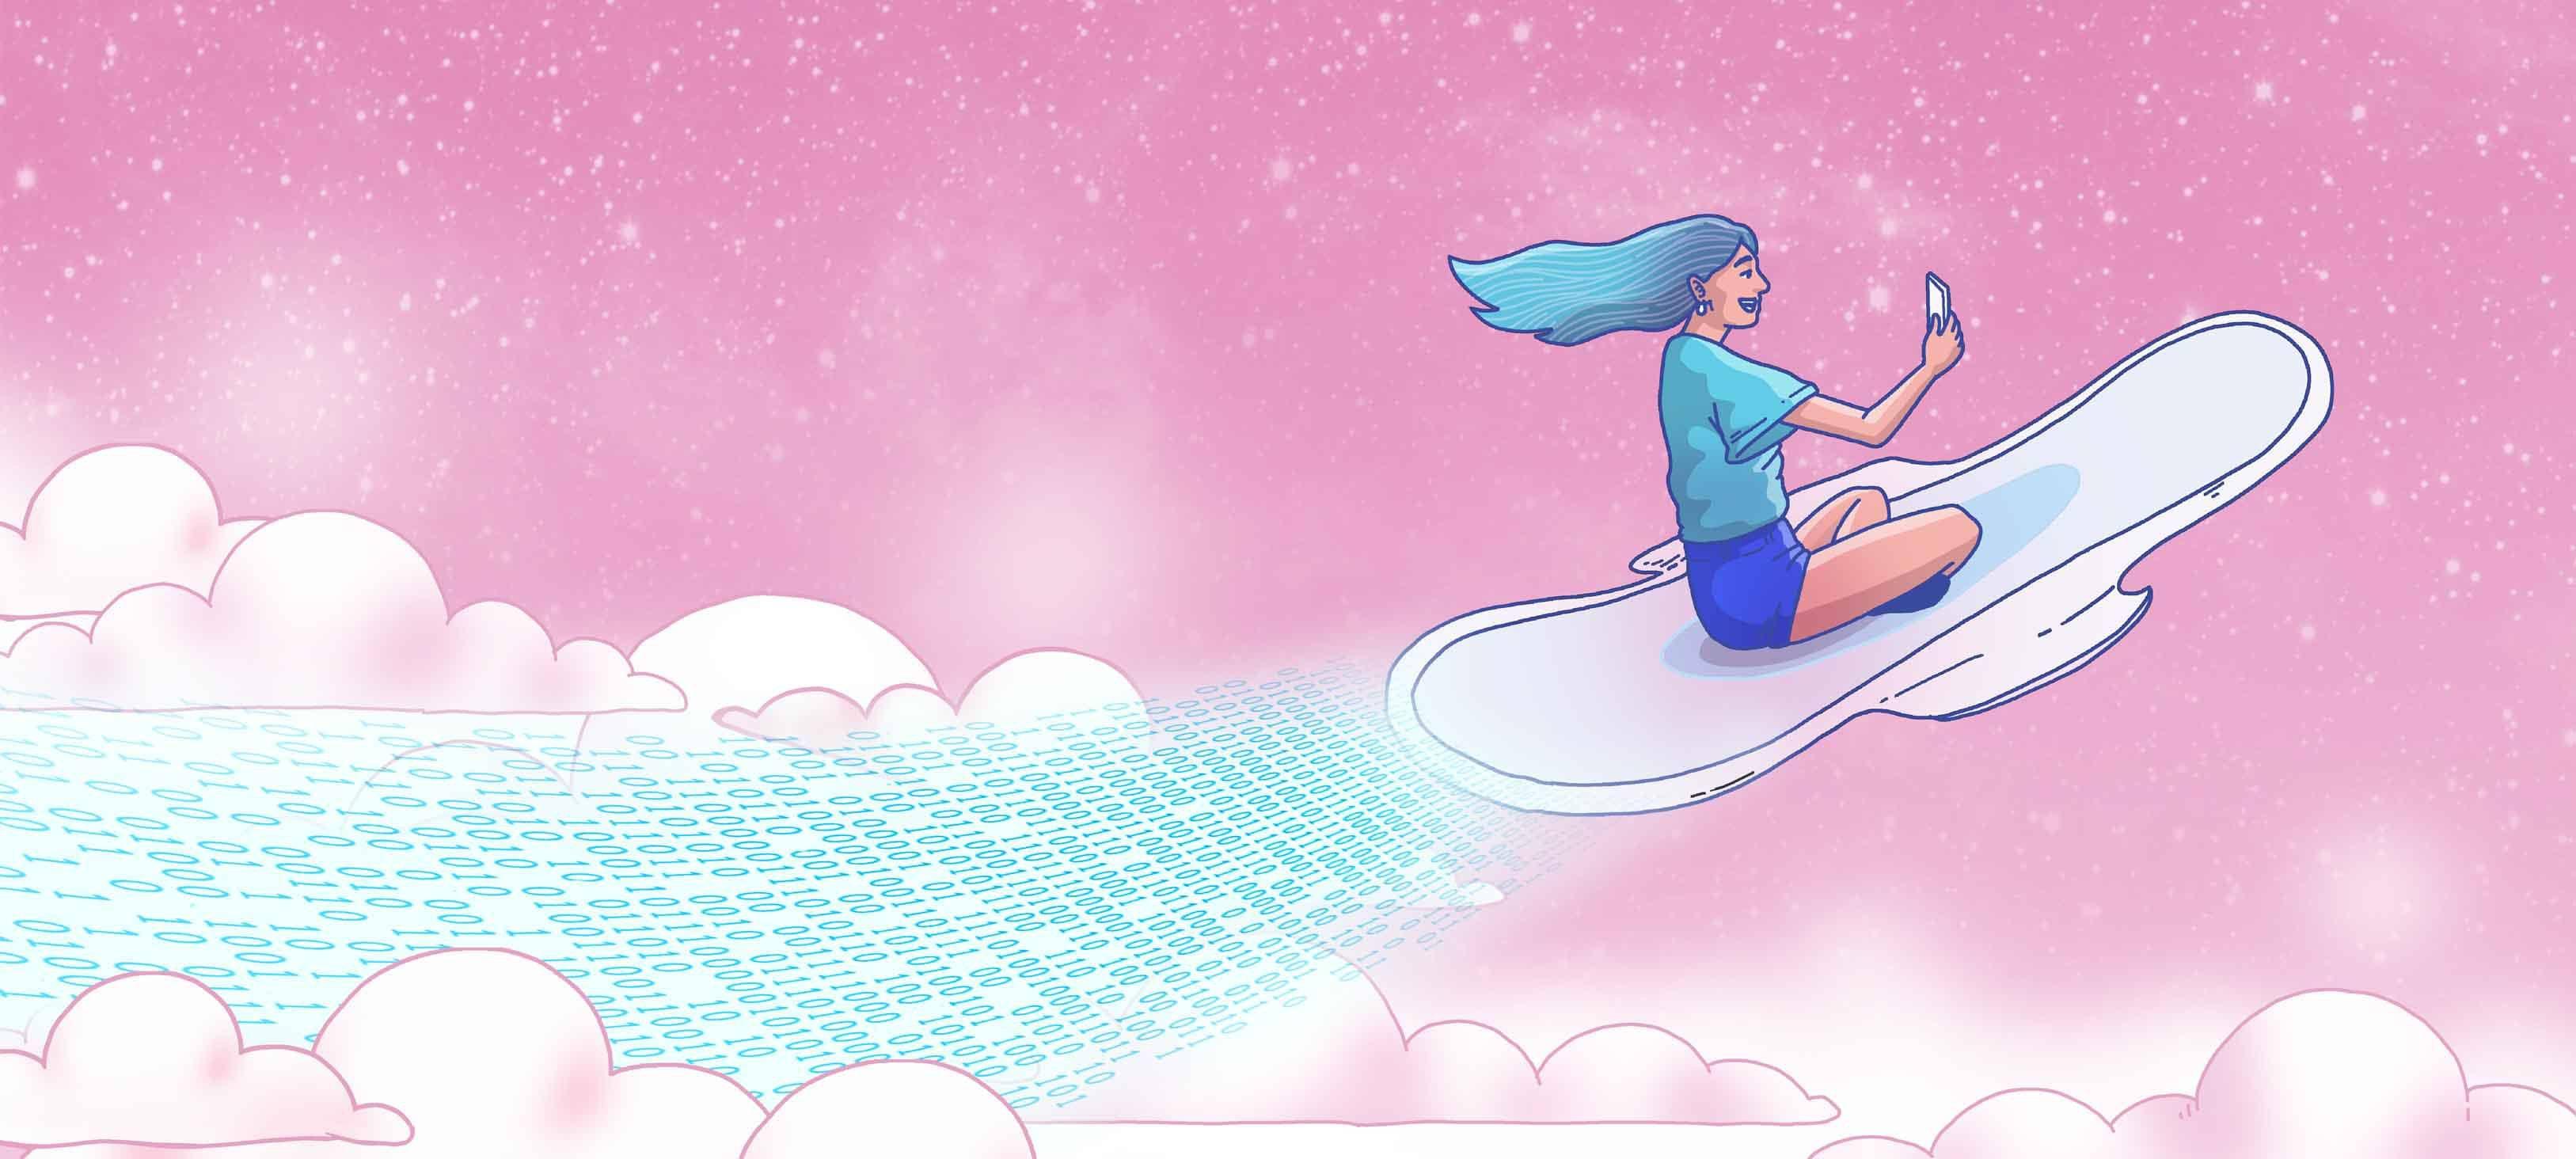 Illustration of women flying along  while looking at her phone, whilst data is seen flowing from behind